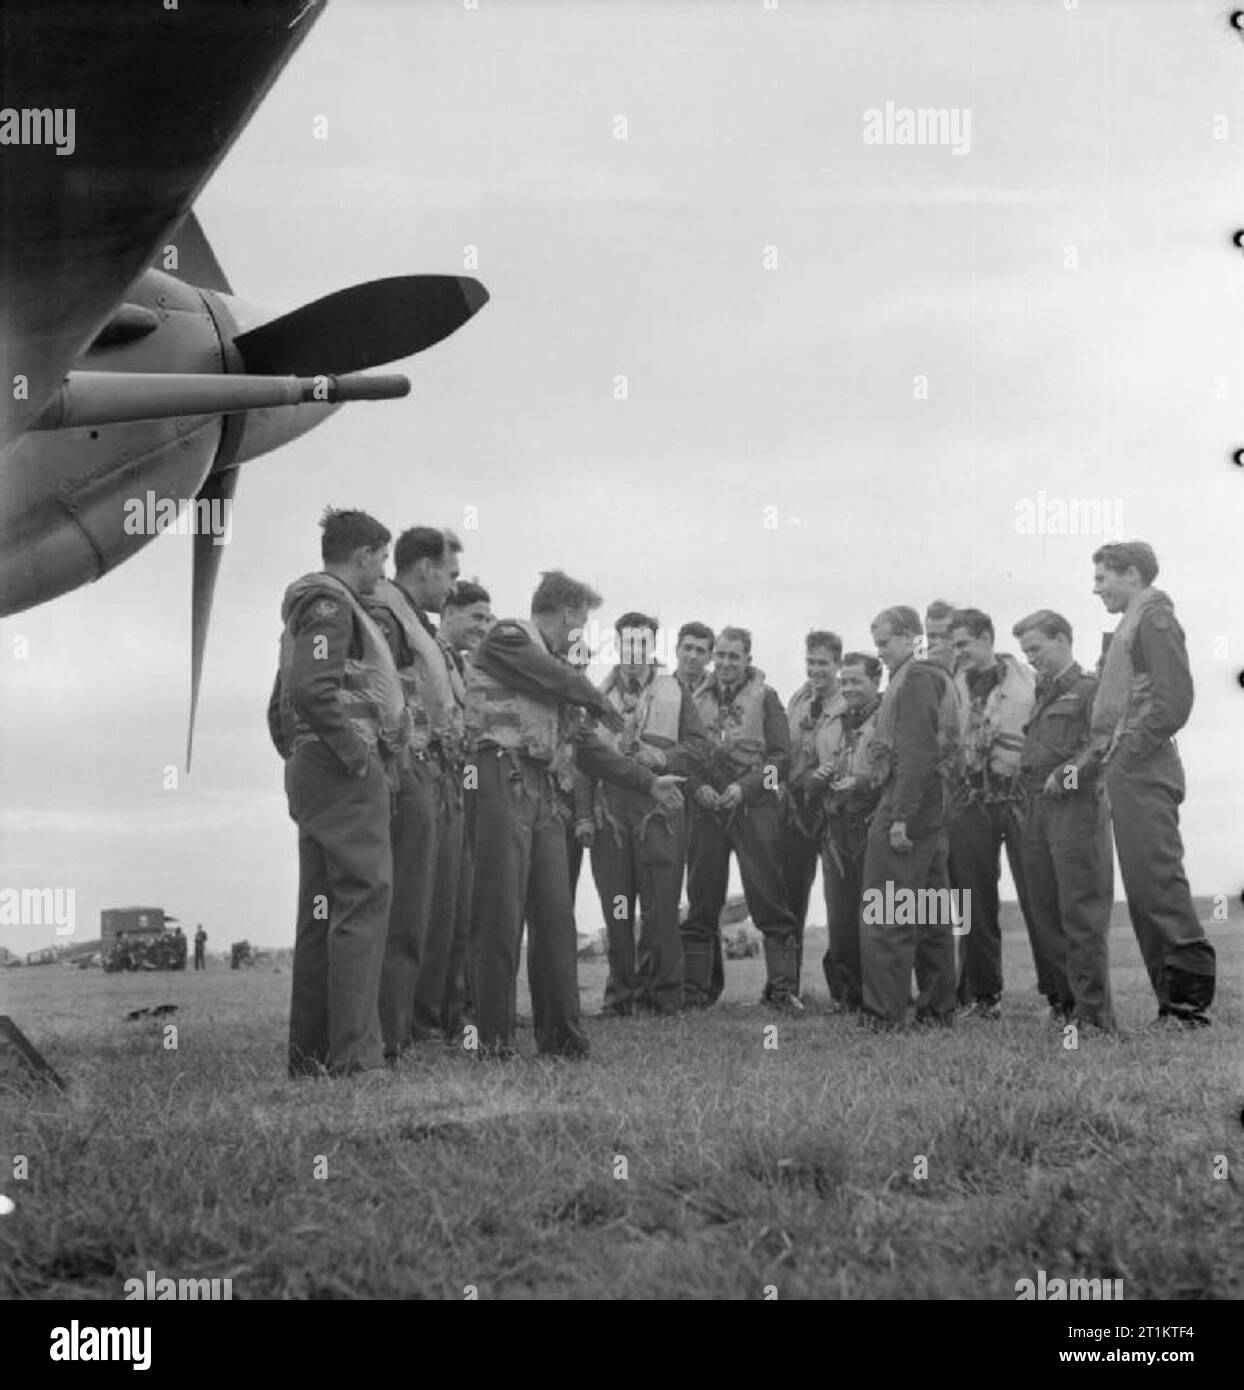 Americans in Britain- the work of No 121 (eagle) Squadron RAF, Rochford, Essex, August 1942 Flying Officer J M Osborne shares his experience of a 'dog fight' with his Commanding Officer, Squadron Leader W B Williams DFC and other members of the Eagle Squadron, following a fighter sweep. Left to right, they are: Flight Sergeant Bill Kelly, Flight Sergeant Sanders, Pilot Officer Don A Young, Flying Officer J M Osborne, Squadron Leader W B Williams DFC, Pilot Officer Cadman Padget, three unidentified personnel, Pilot Officer F R Boyles, Flight Lieutenant Seldon R Edner (just visible), Flight Lieu Stock Photo